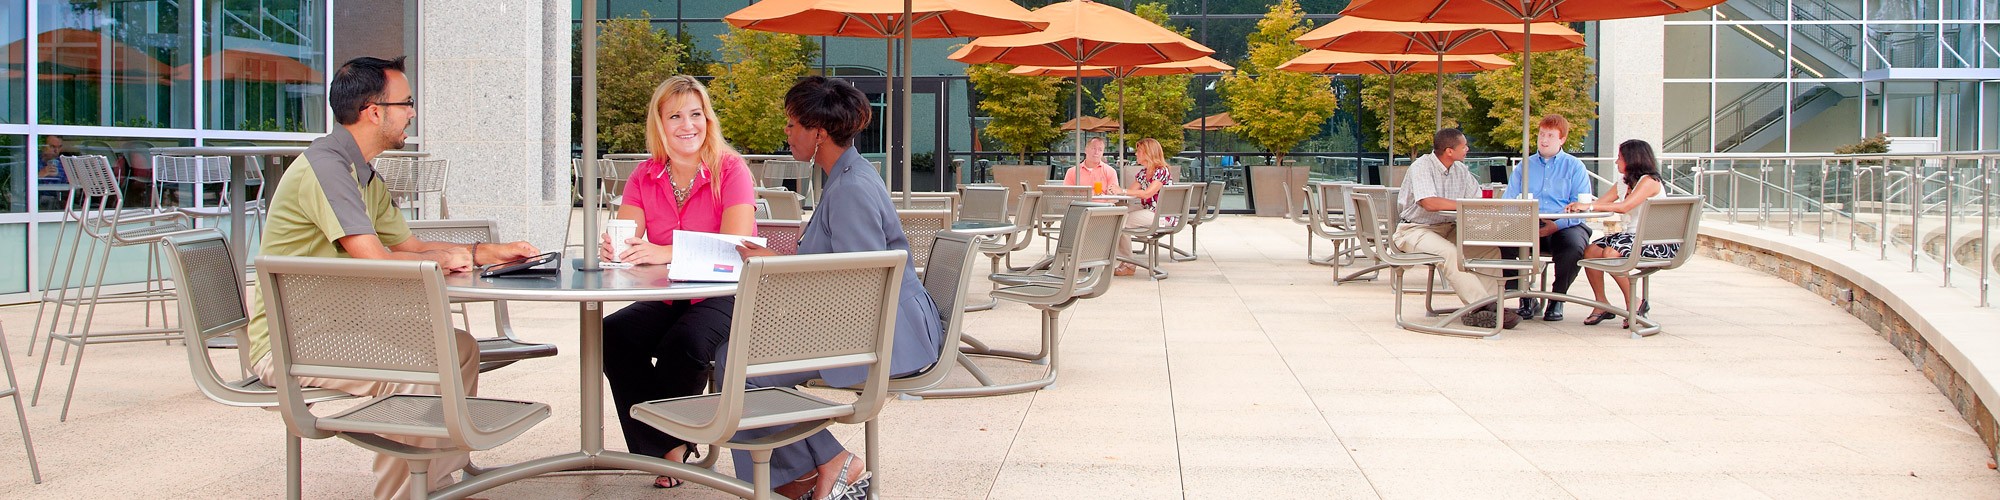 Employees sitting at tables of outdoor patio area at SAS headquarters in Cary NC